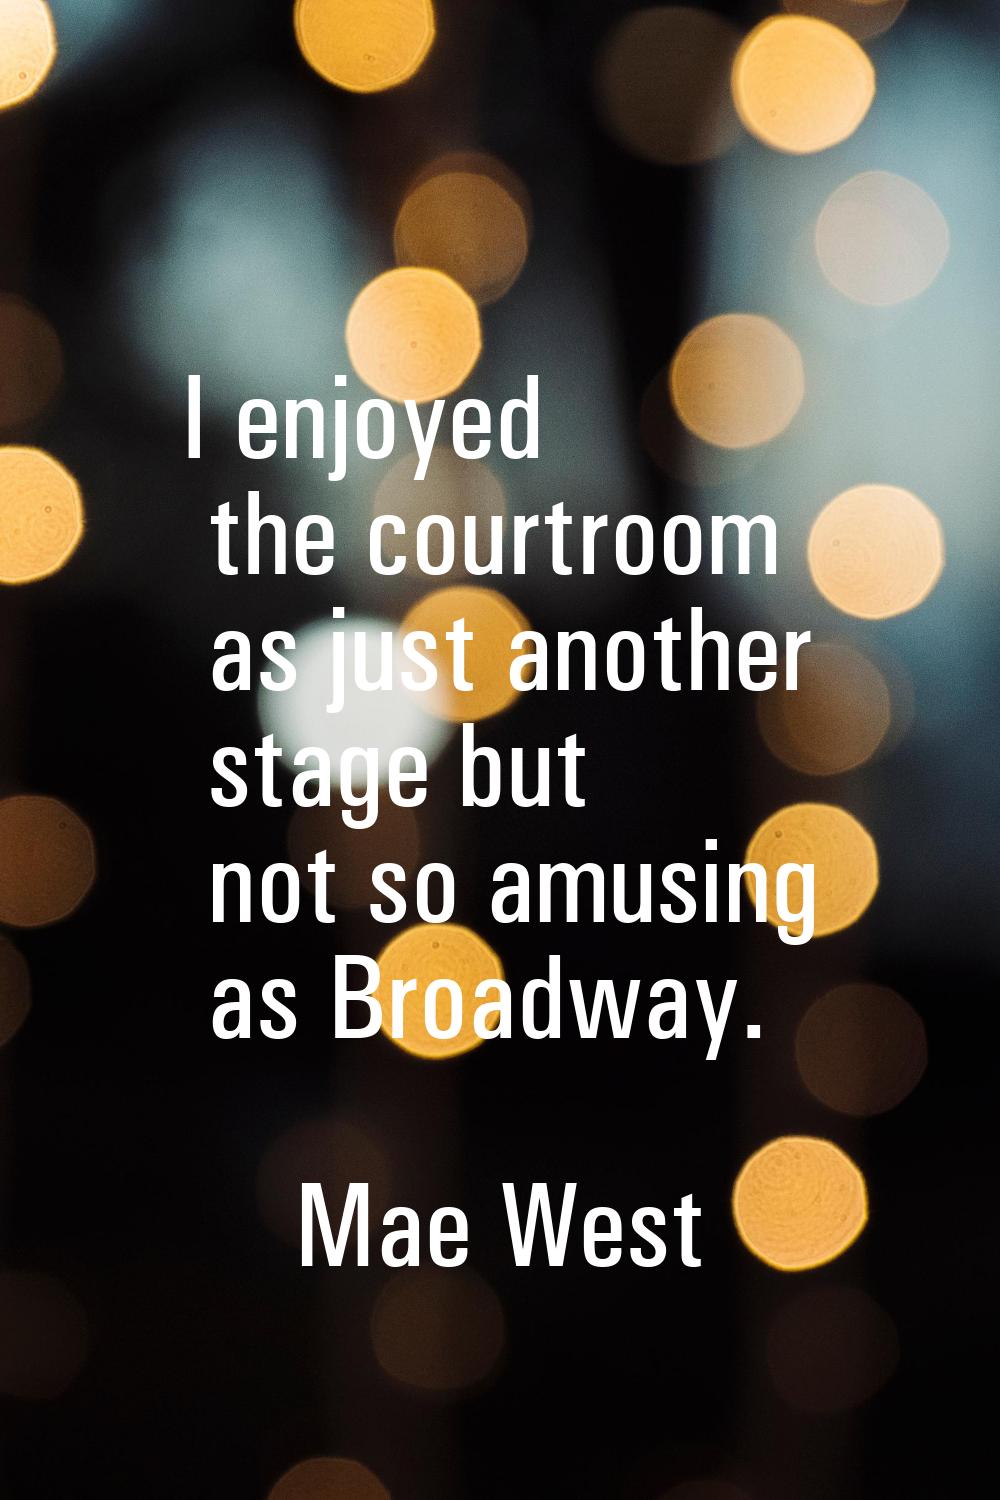 I enjoyed the courtroom as just another stage but not so amusing as Broadway.